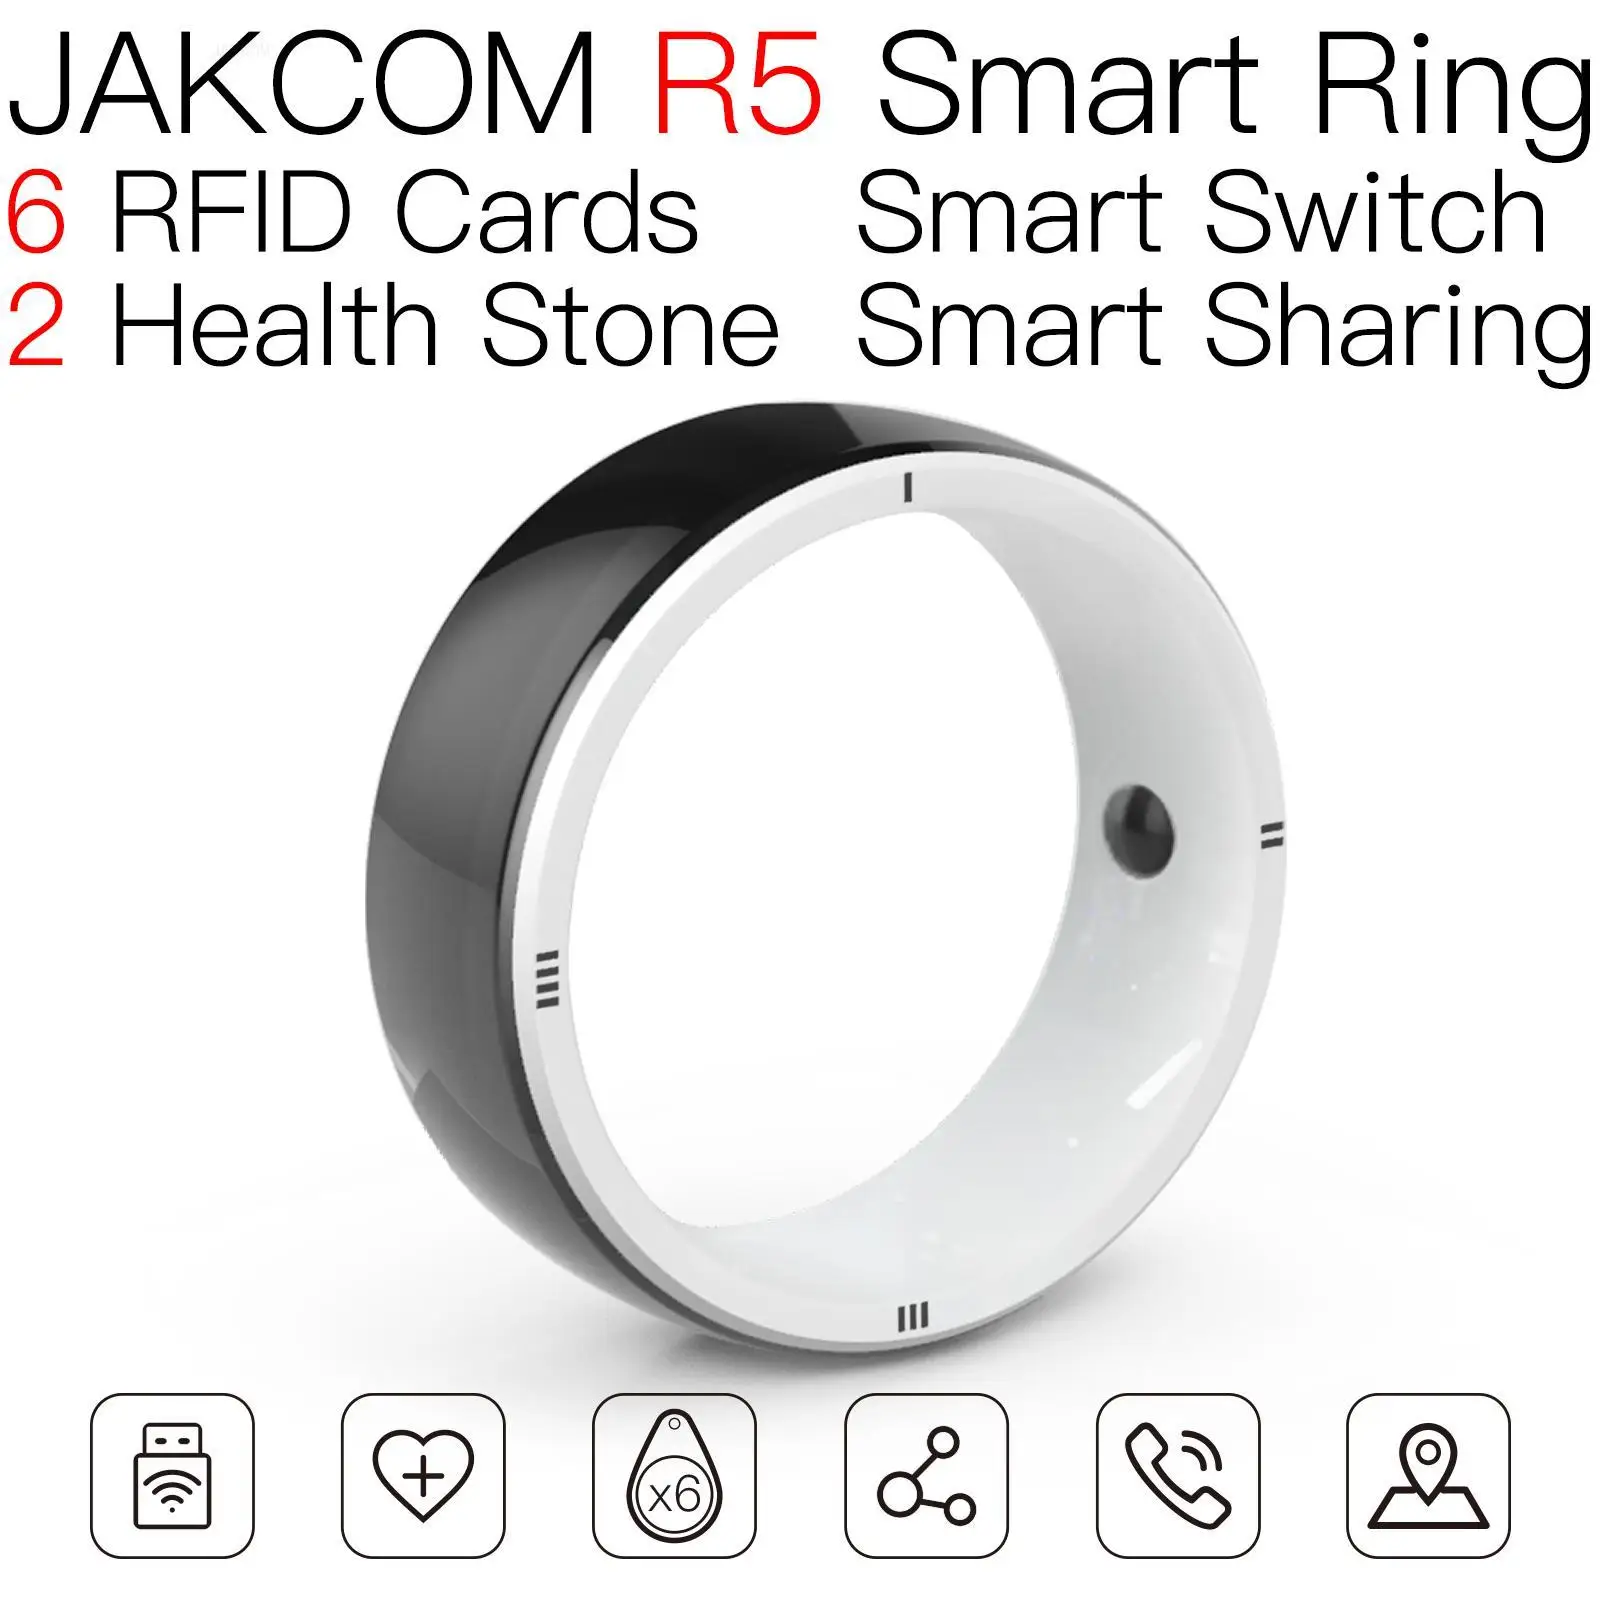 

JAKCOM R5 Smart Ring Nice than electrico m6 smart band portable watch s1 active 7 global hello h11